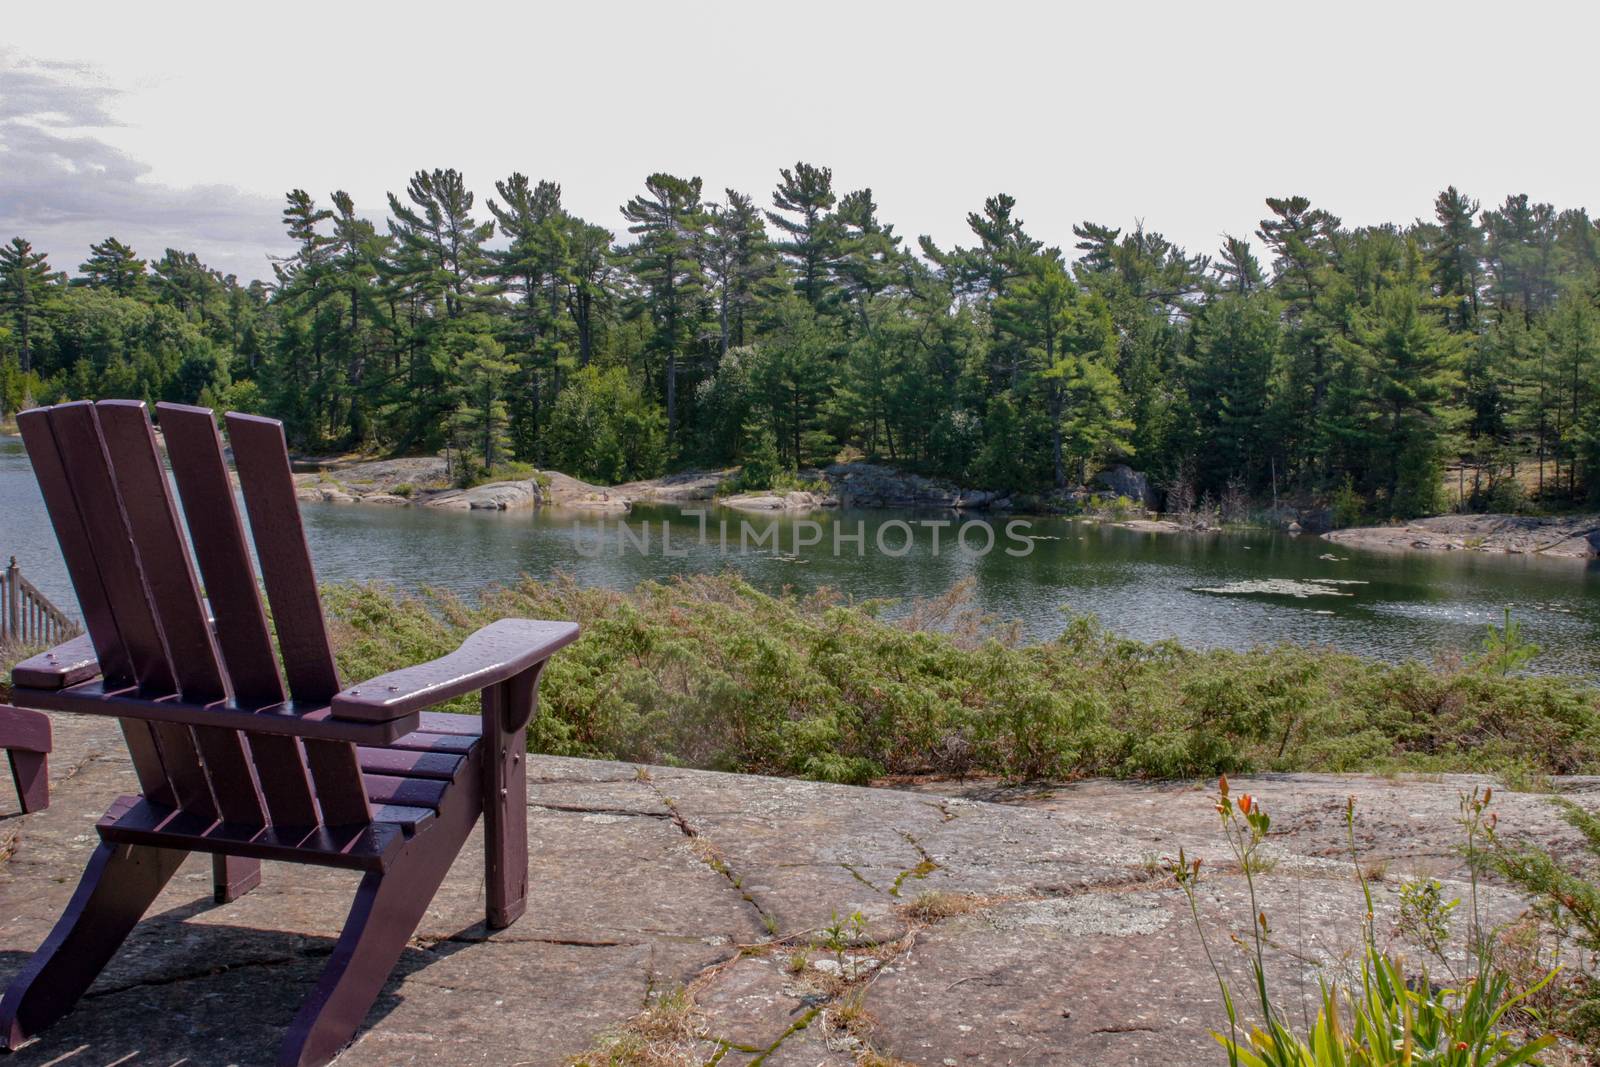 Two black Muskoka chairs sitting on a wood dock facing a lake. Across the calm water is a white cottage nestled among green trees. Canada flag is visible by mynewturtle1